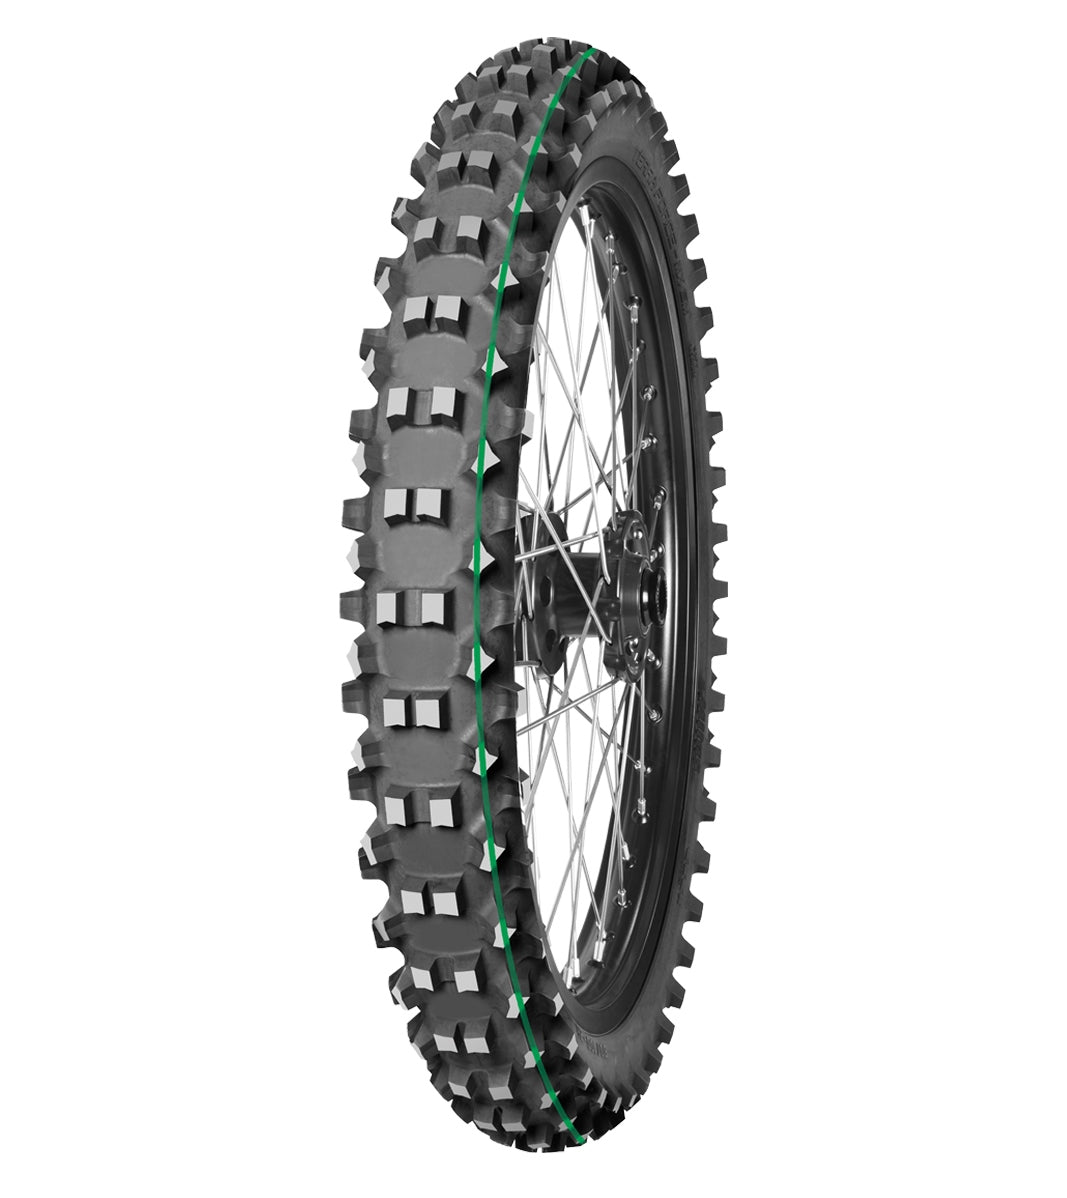 Mitas TERRA FORCE-MX MH 90/100-21 Enduro Competition Off-Road SUPER LIGHT 57M Green Tube Front Tire, 226660, 90/100-21, Enduro Competition, Front, Off-Road, Terra Force, Terra Force-MX MH, Trail, Tires - Imported and distributed in North & South America by Lindeco Genuine Powersports - Premier Powersports Equipment and Accessories for Motorcycle Enthusiasts, Professional Riders and Dealers.